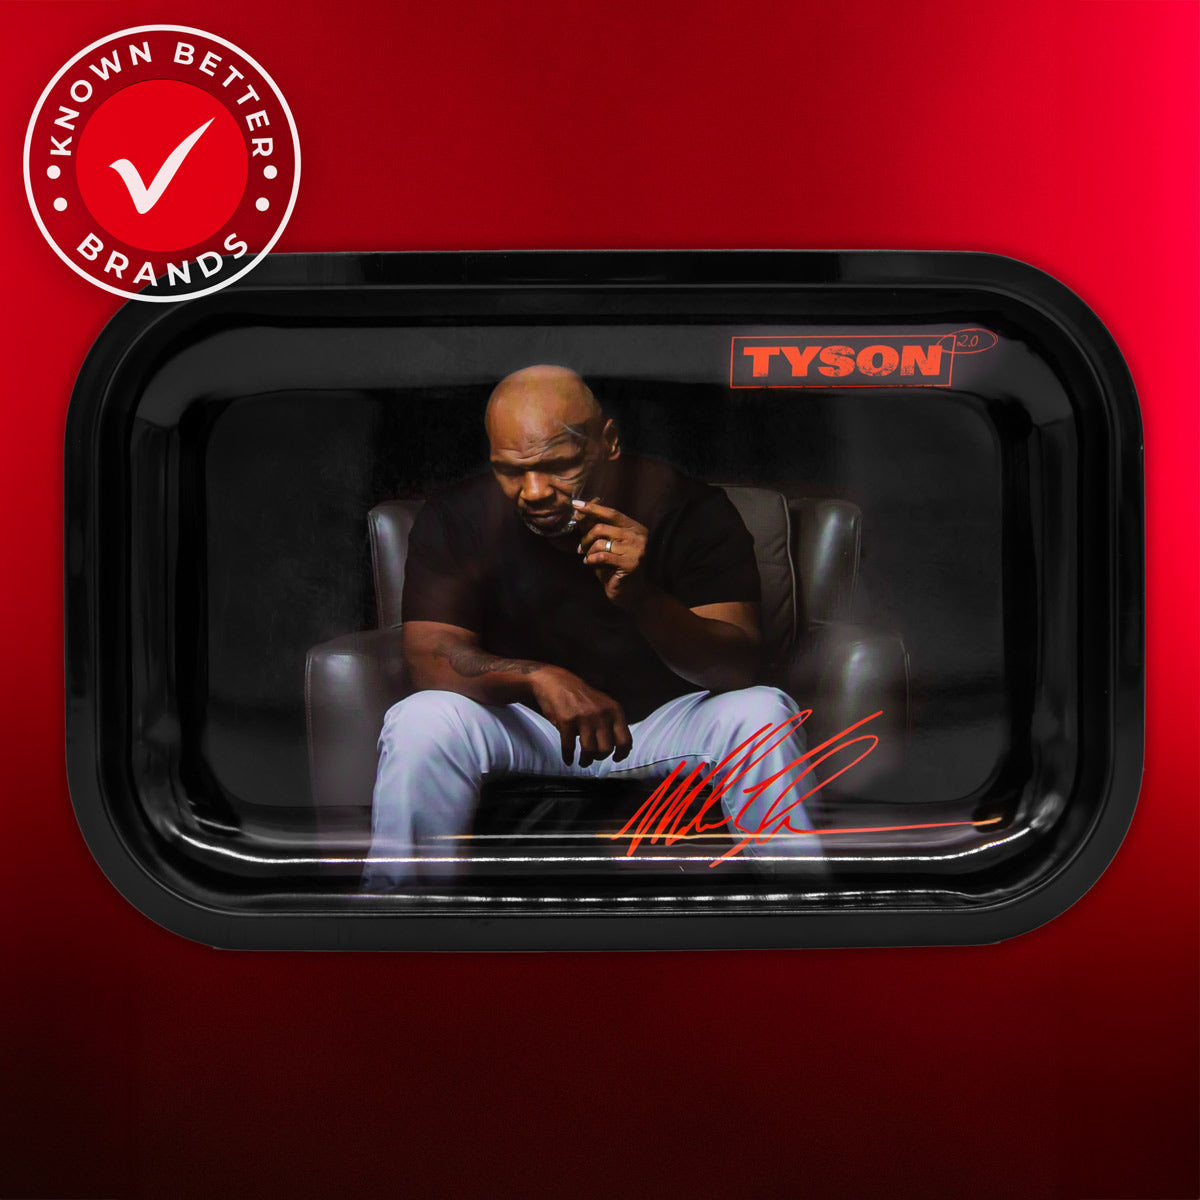 TYSON 2.0 Up In Smoke Rolling Tray: Mike Tyson Lounging, Smoking, and Contemplating on Black Background - Premium Cannabis Accessory